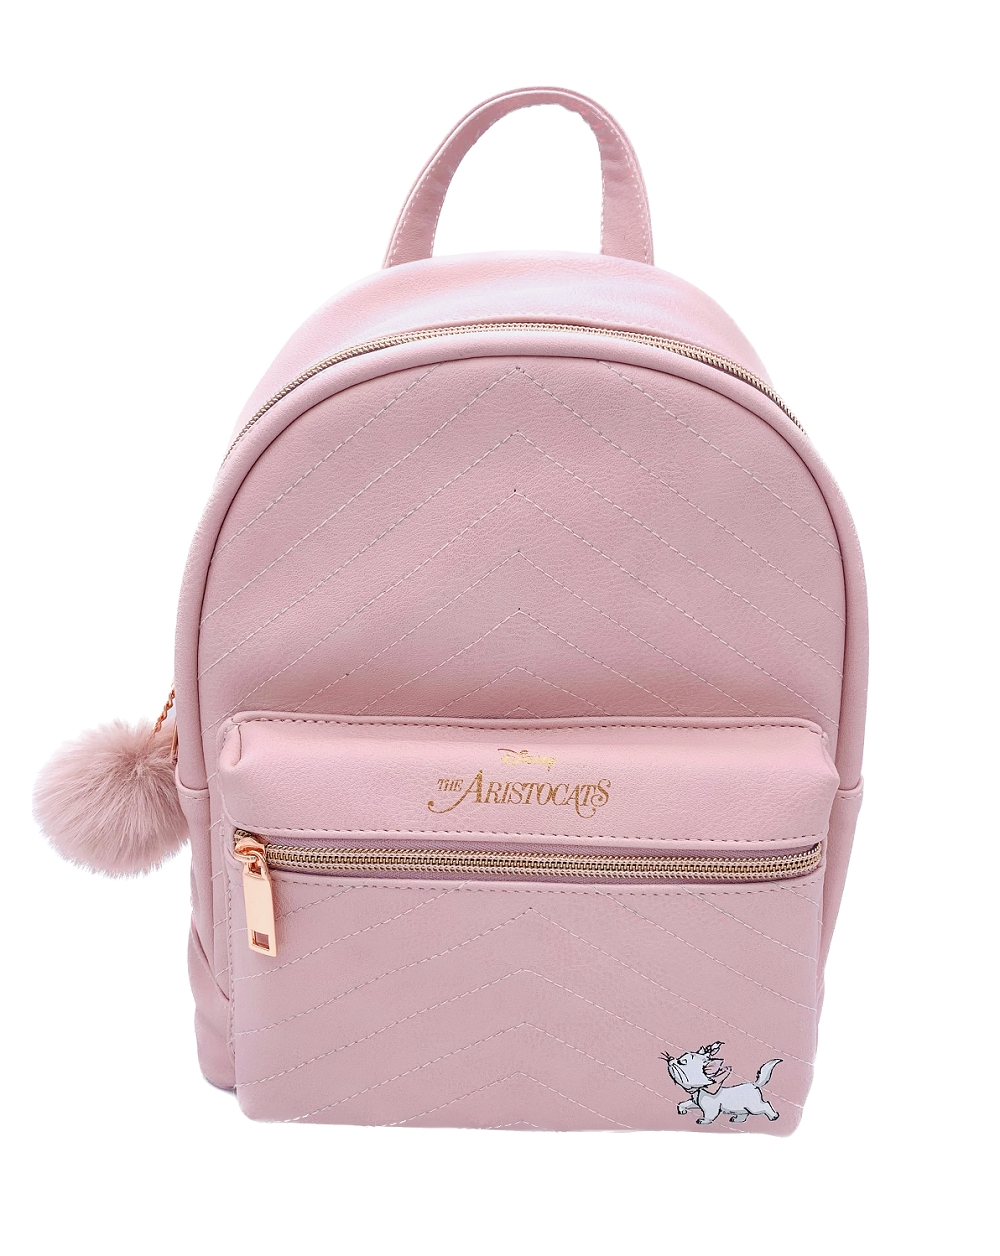 ARISTOCATS - Marie - Fashion BackPack - '28x22x11cm'